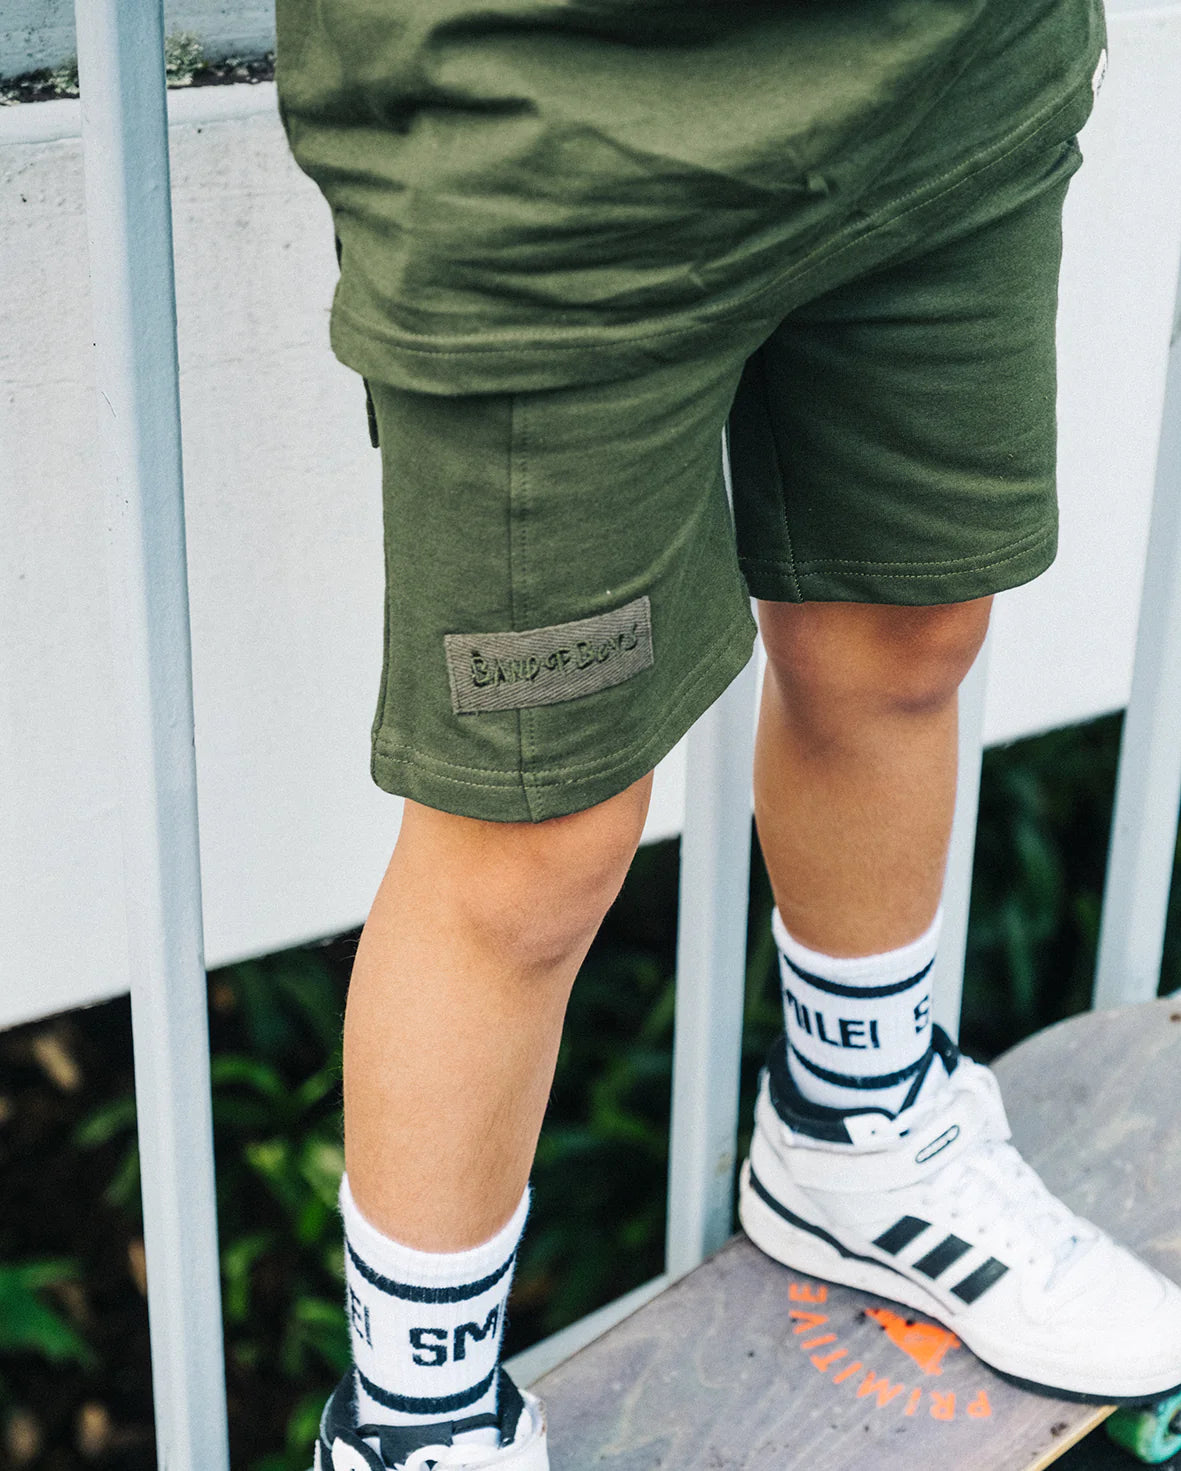 Shorts - Seam Front Army Green